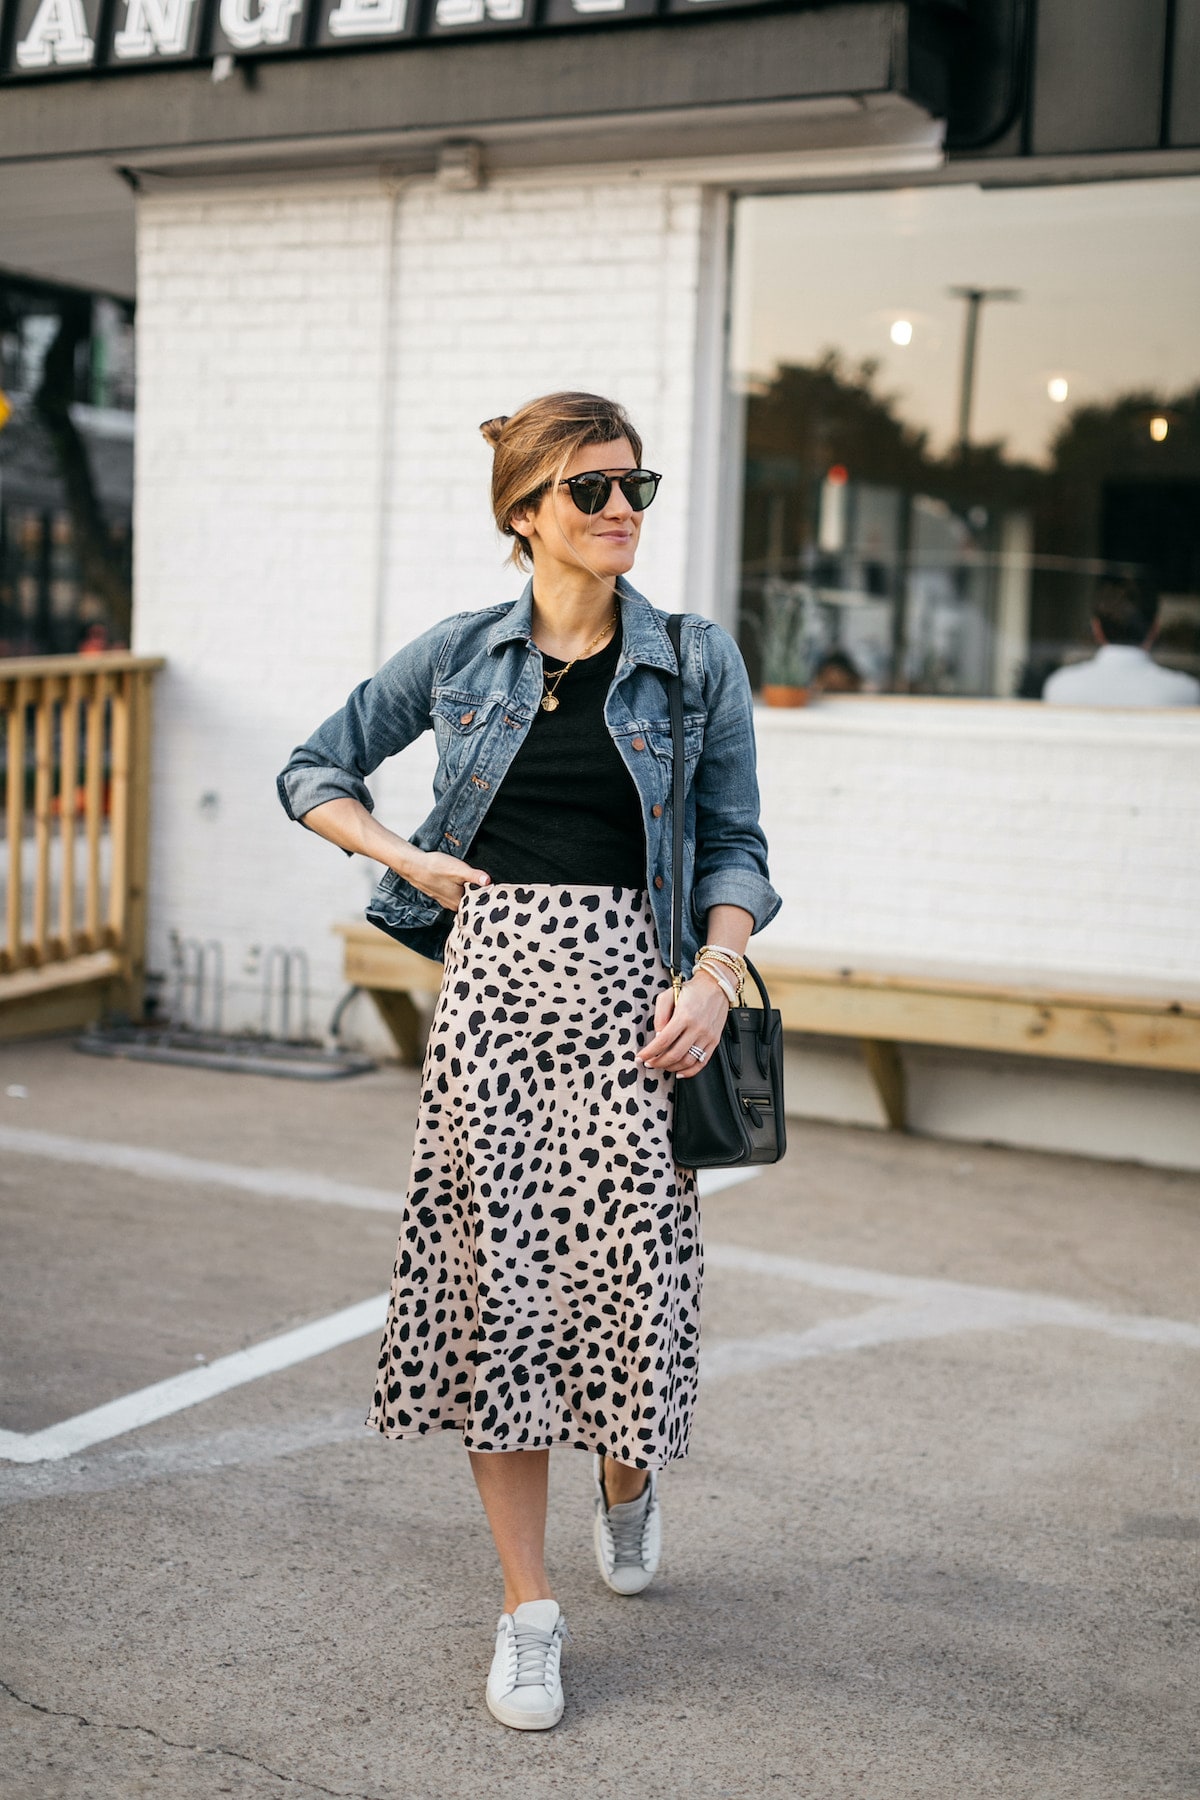 https://www.brightontheday.com/wp-content/uploads/2021/09/Brighton-Butler-wearing-amazon-leopard-print-skirt-madewell-tee-and-jean-jacket11.jpg